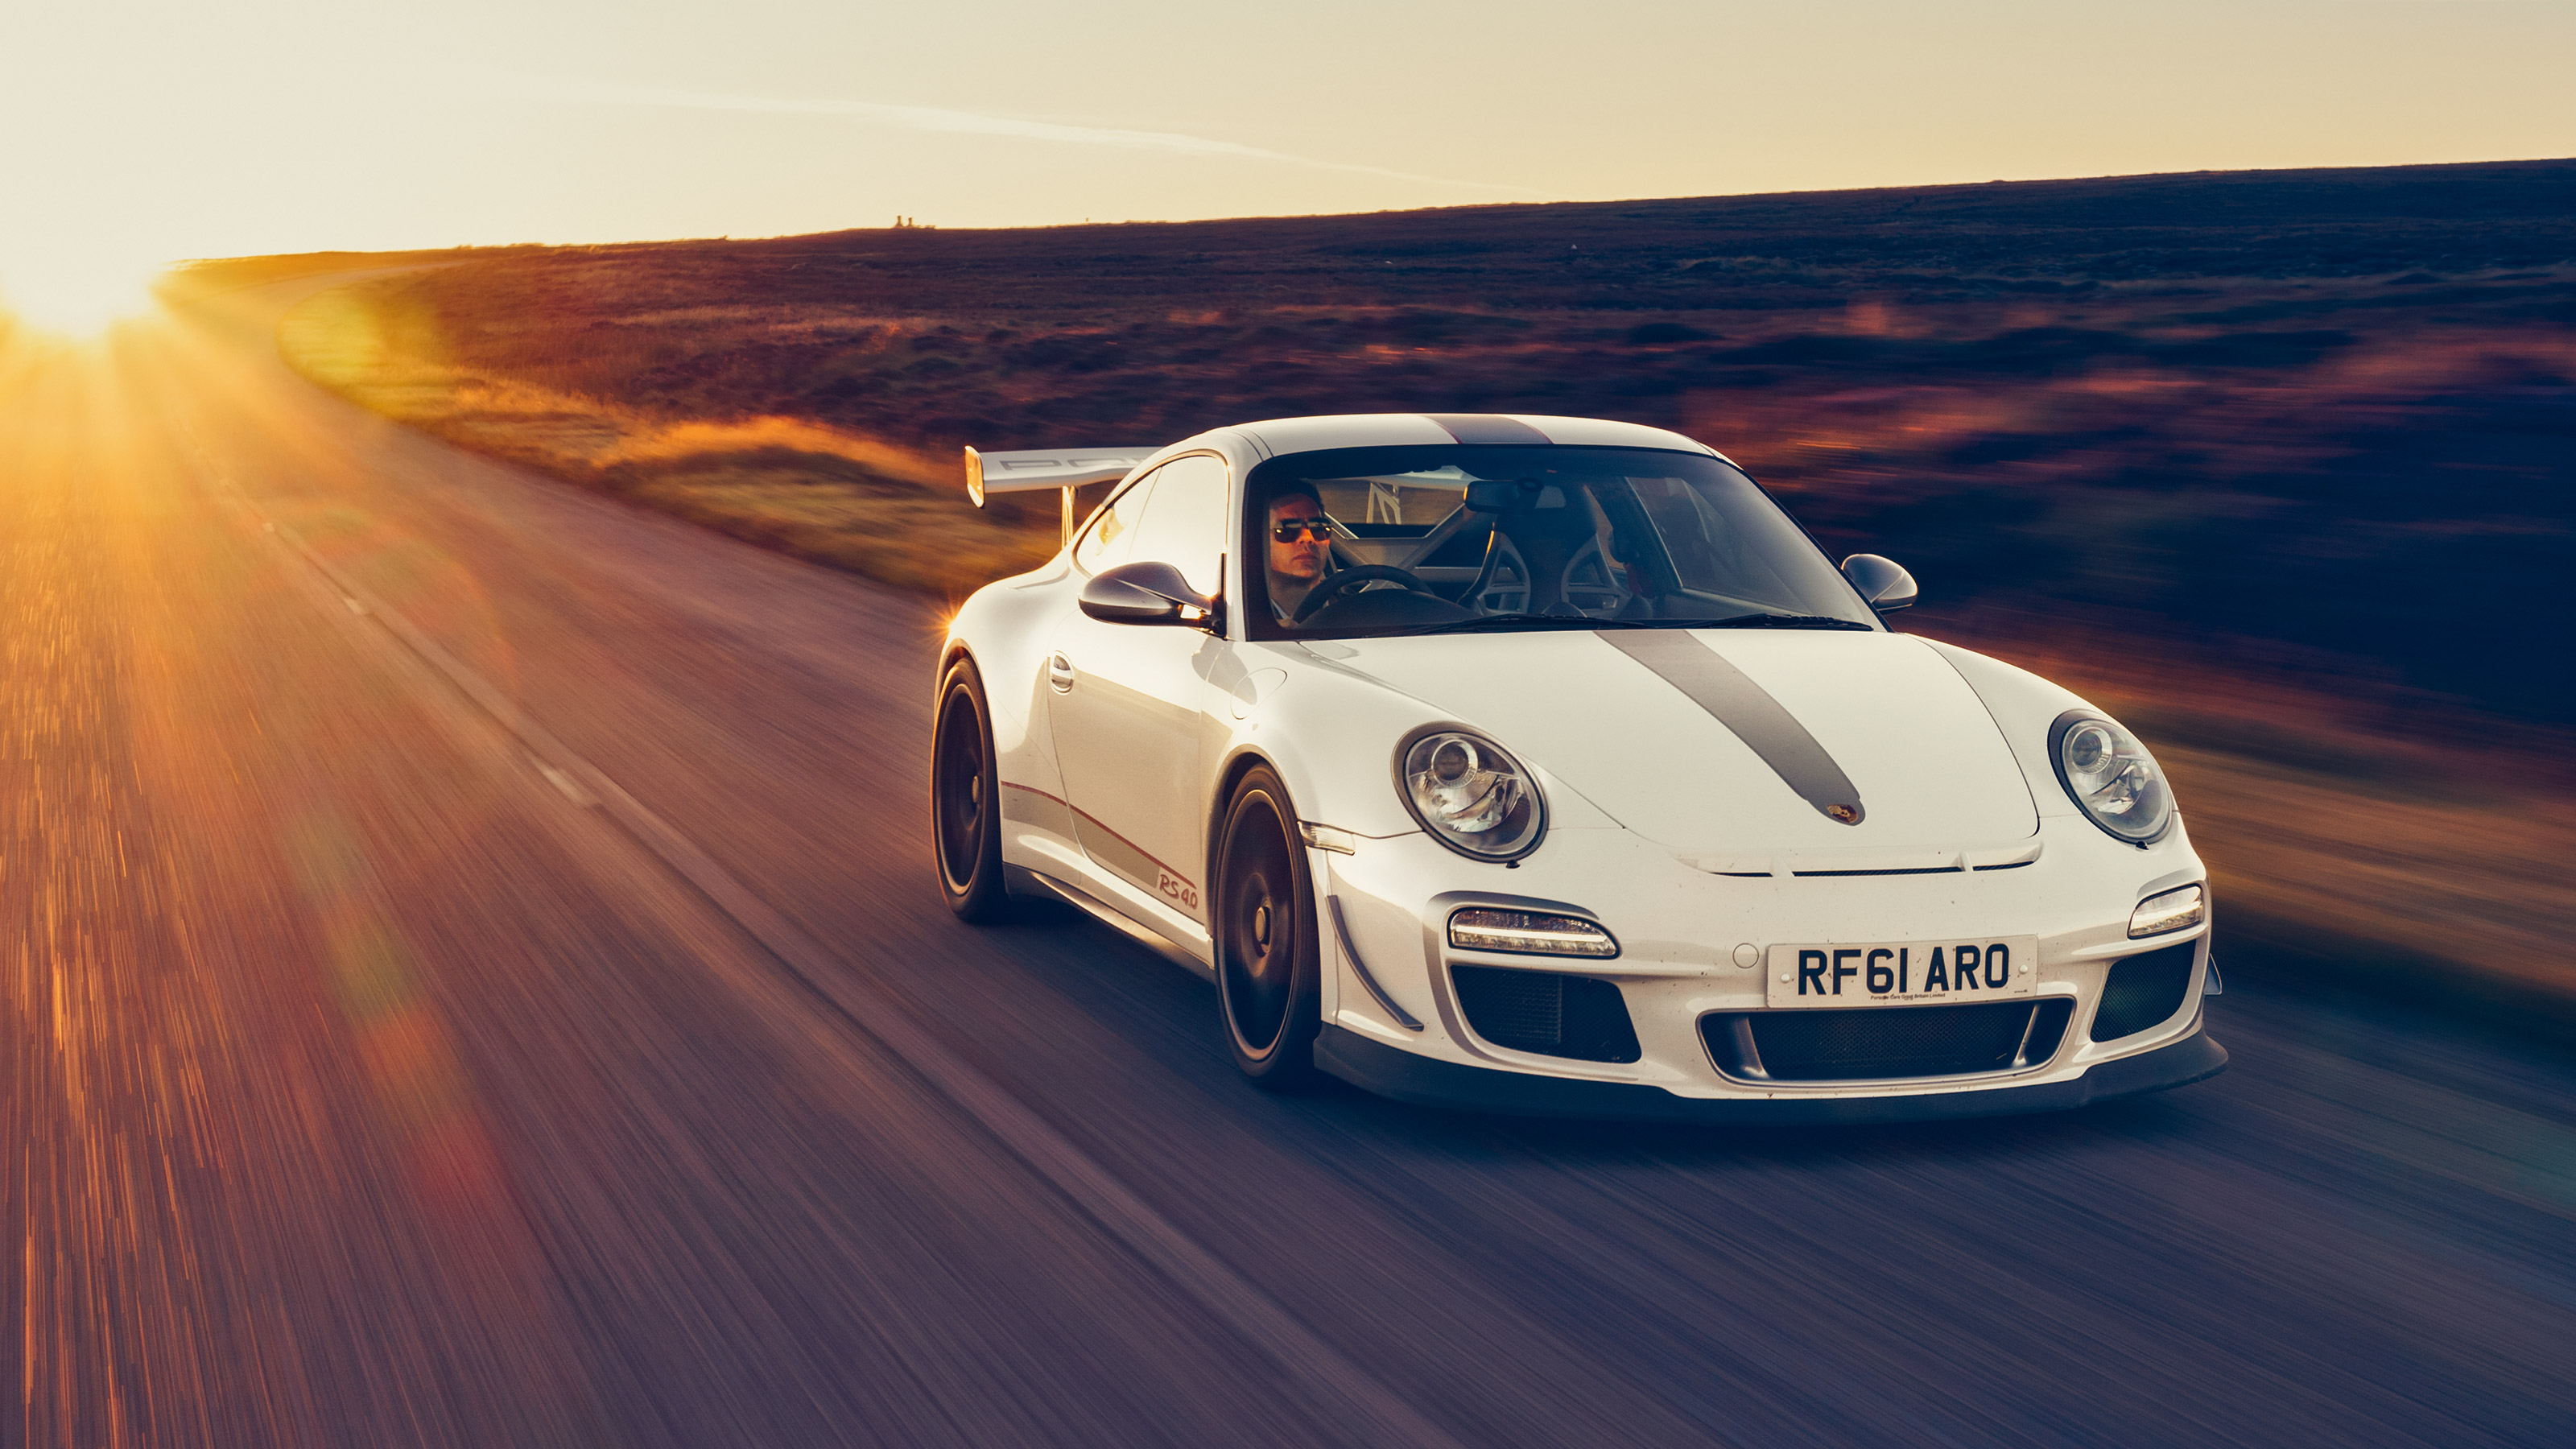  Porsche 911 GT3 RS : review, history and specs of an icon | evo